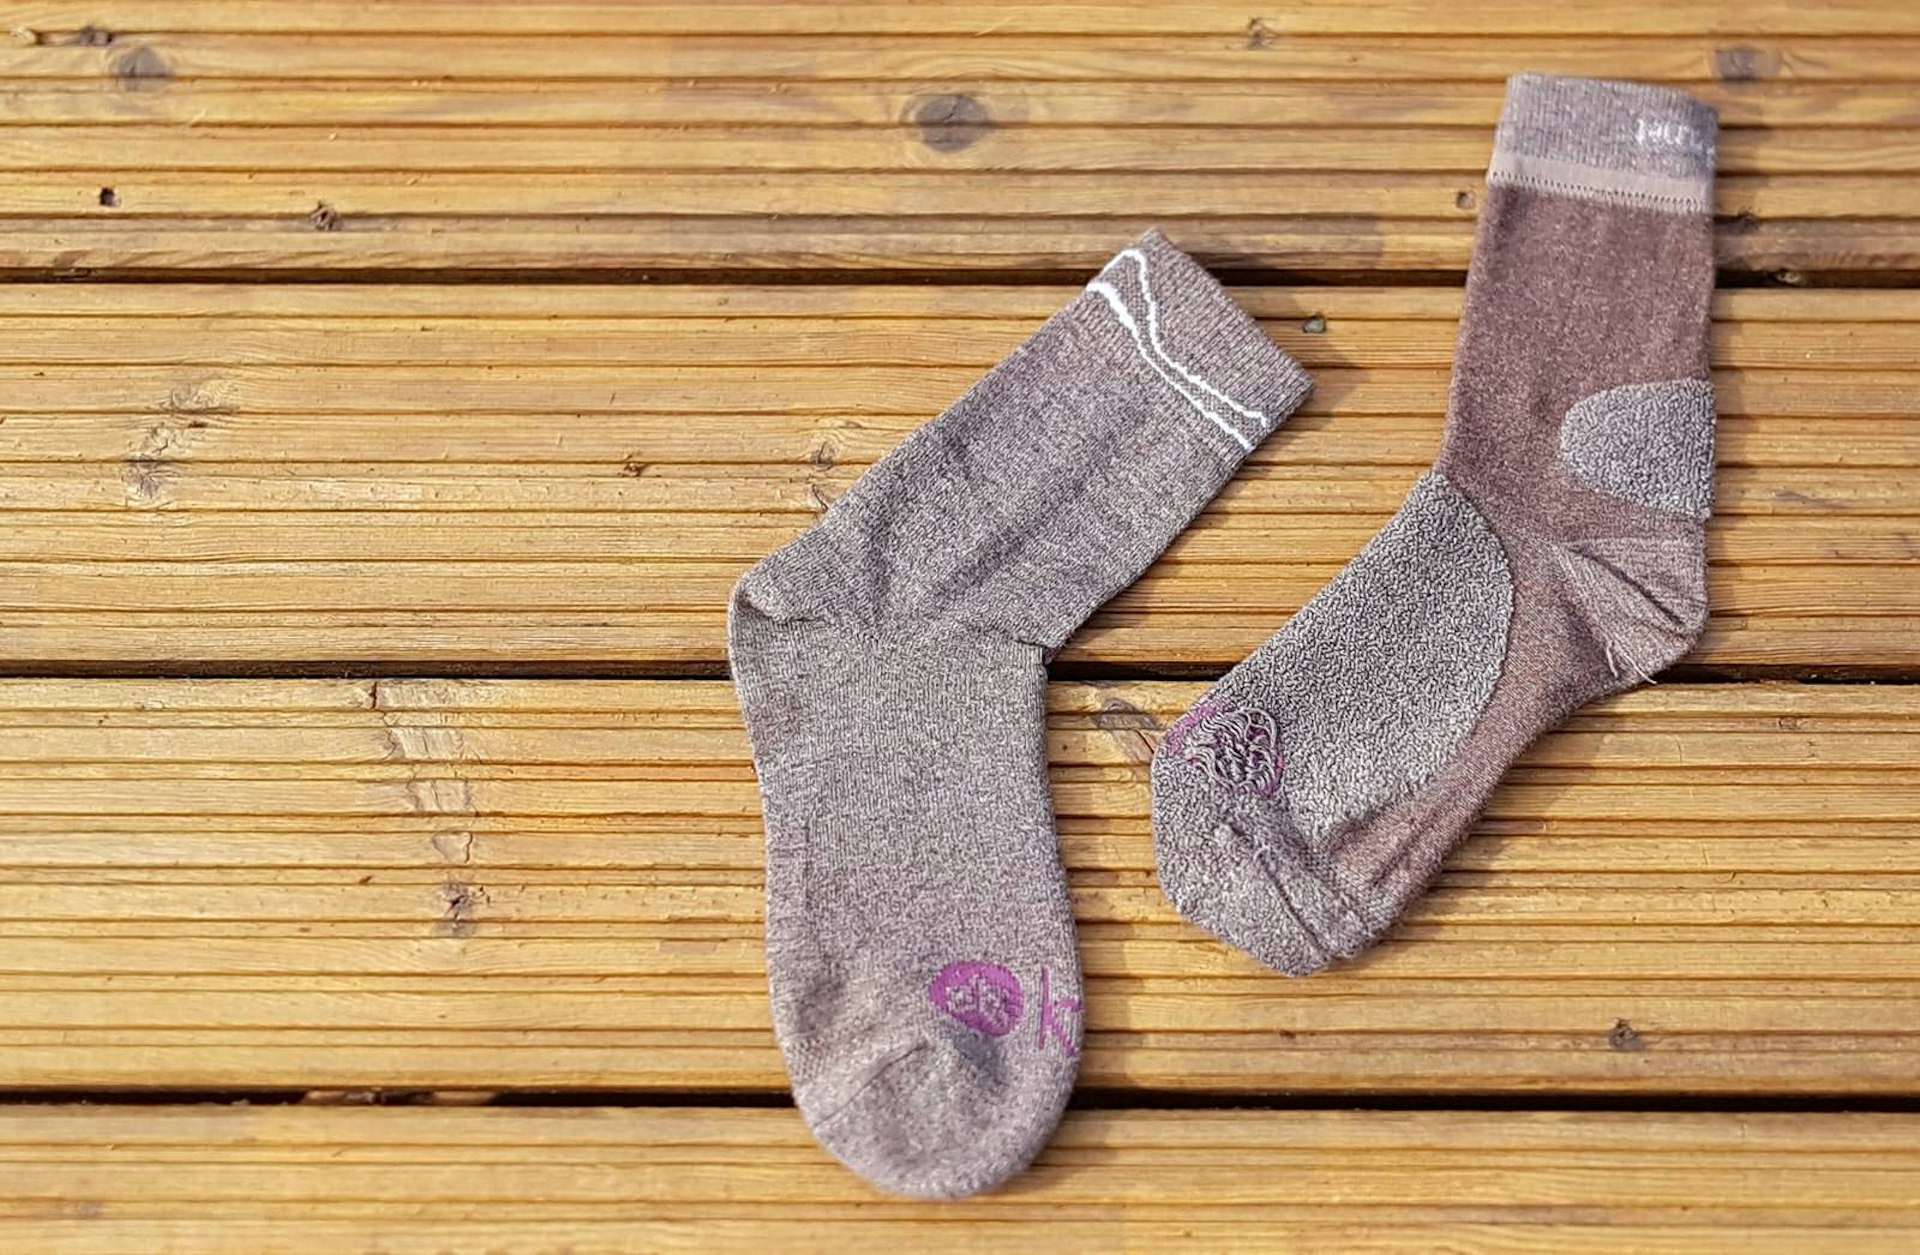 Kora Upside Down Socks, shown in purple with extra padding on the top of the foot and back of the heel